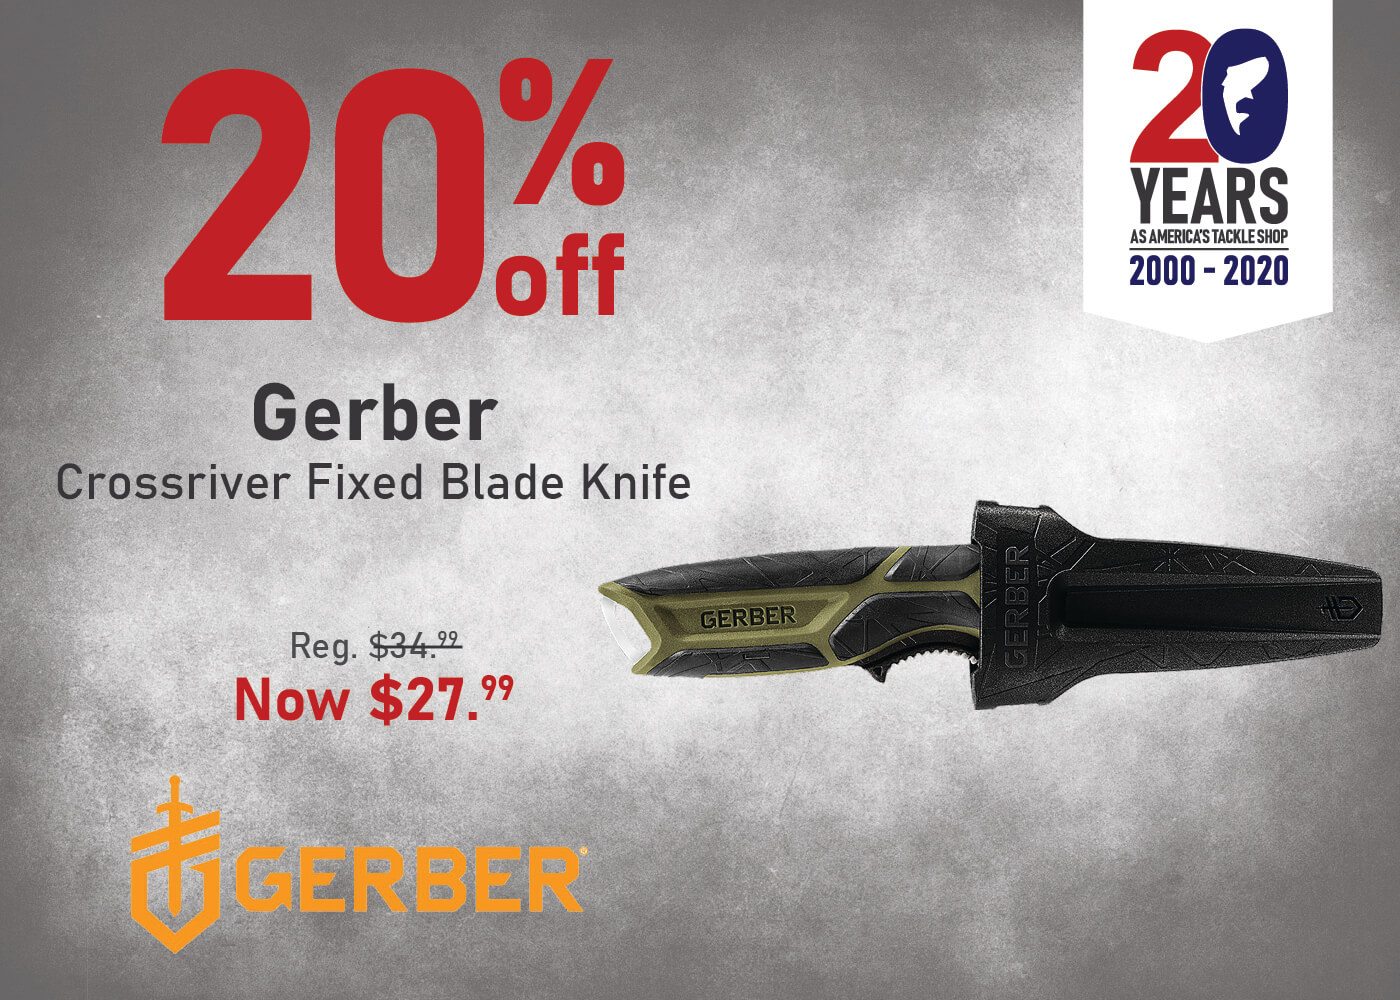 Save 20% on the Gerber Crossriver Fixed Blade Knife